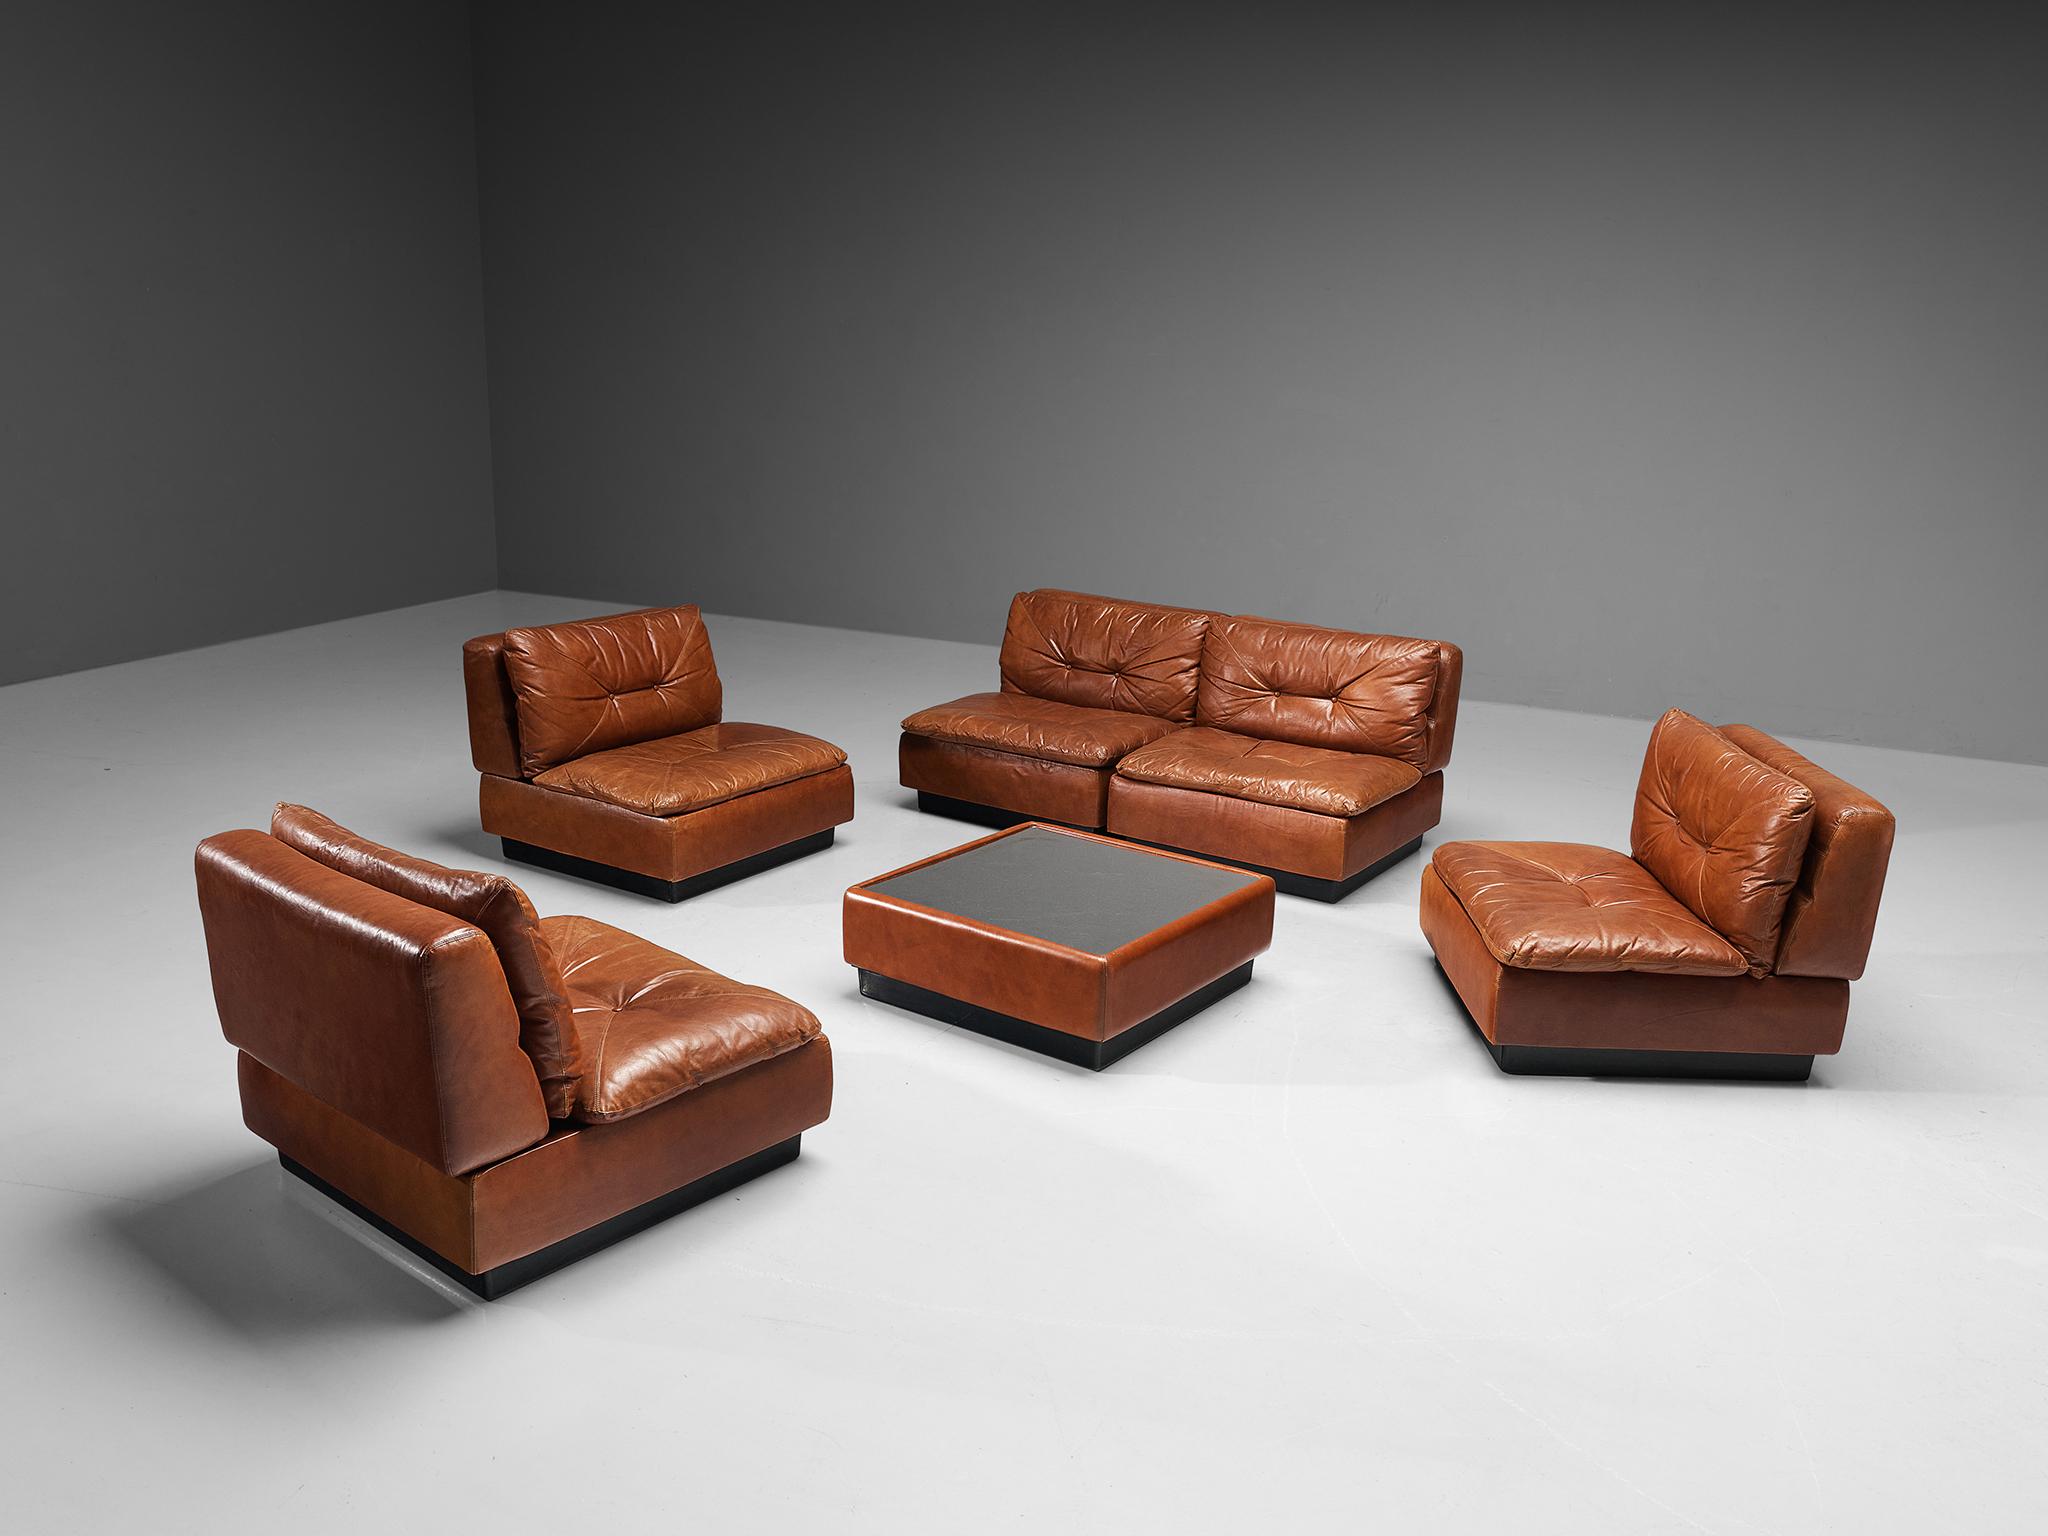 Saporiti, modular sofa with 5 elements and coffee table, cognac leather, metal, Italy, 1970s. 

This well-designed sectional sofa manufactured by Saporiti in the 1970s is fully executed in beautiful cognac leather that contributes to the whole